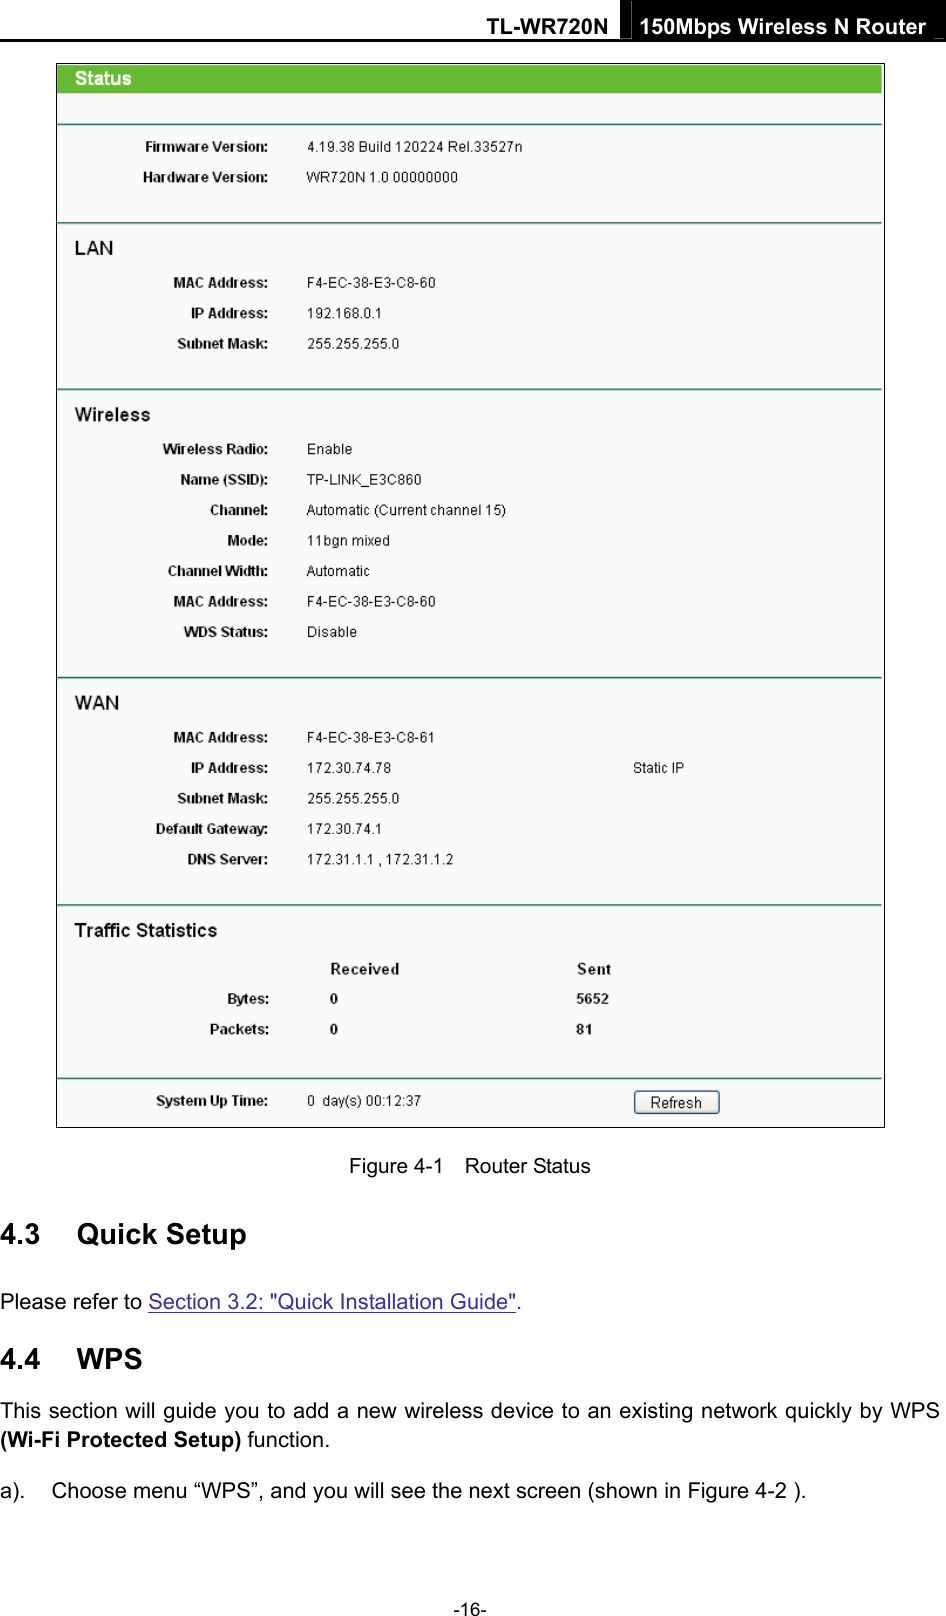 TL-WR720N 150Mbps Wireless N Router  Figure 4-1    Router Status 4.3  Quick Setup Please refer to Section 3.2: &quot;Quick Installation Guide&quot;. 4.4  WPS This section will guide you to add a new wireless device to an existing network quickly by WPS (Wi-Fi Protected Setup) function.   a).  Choose menu “WPS”, and you will see the next screen (shown in Figure 4-2 ).   -16- 